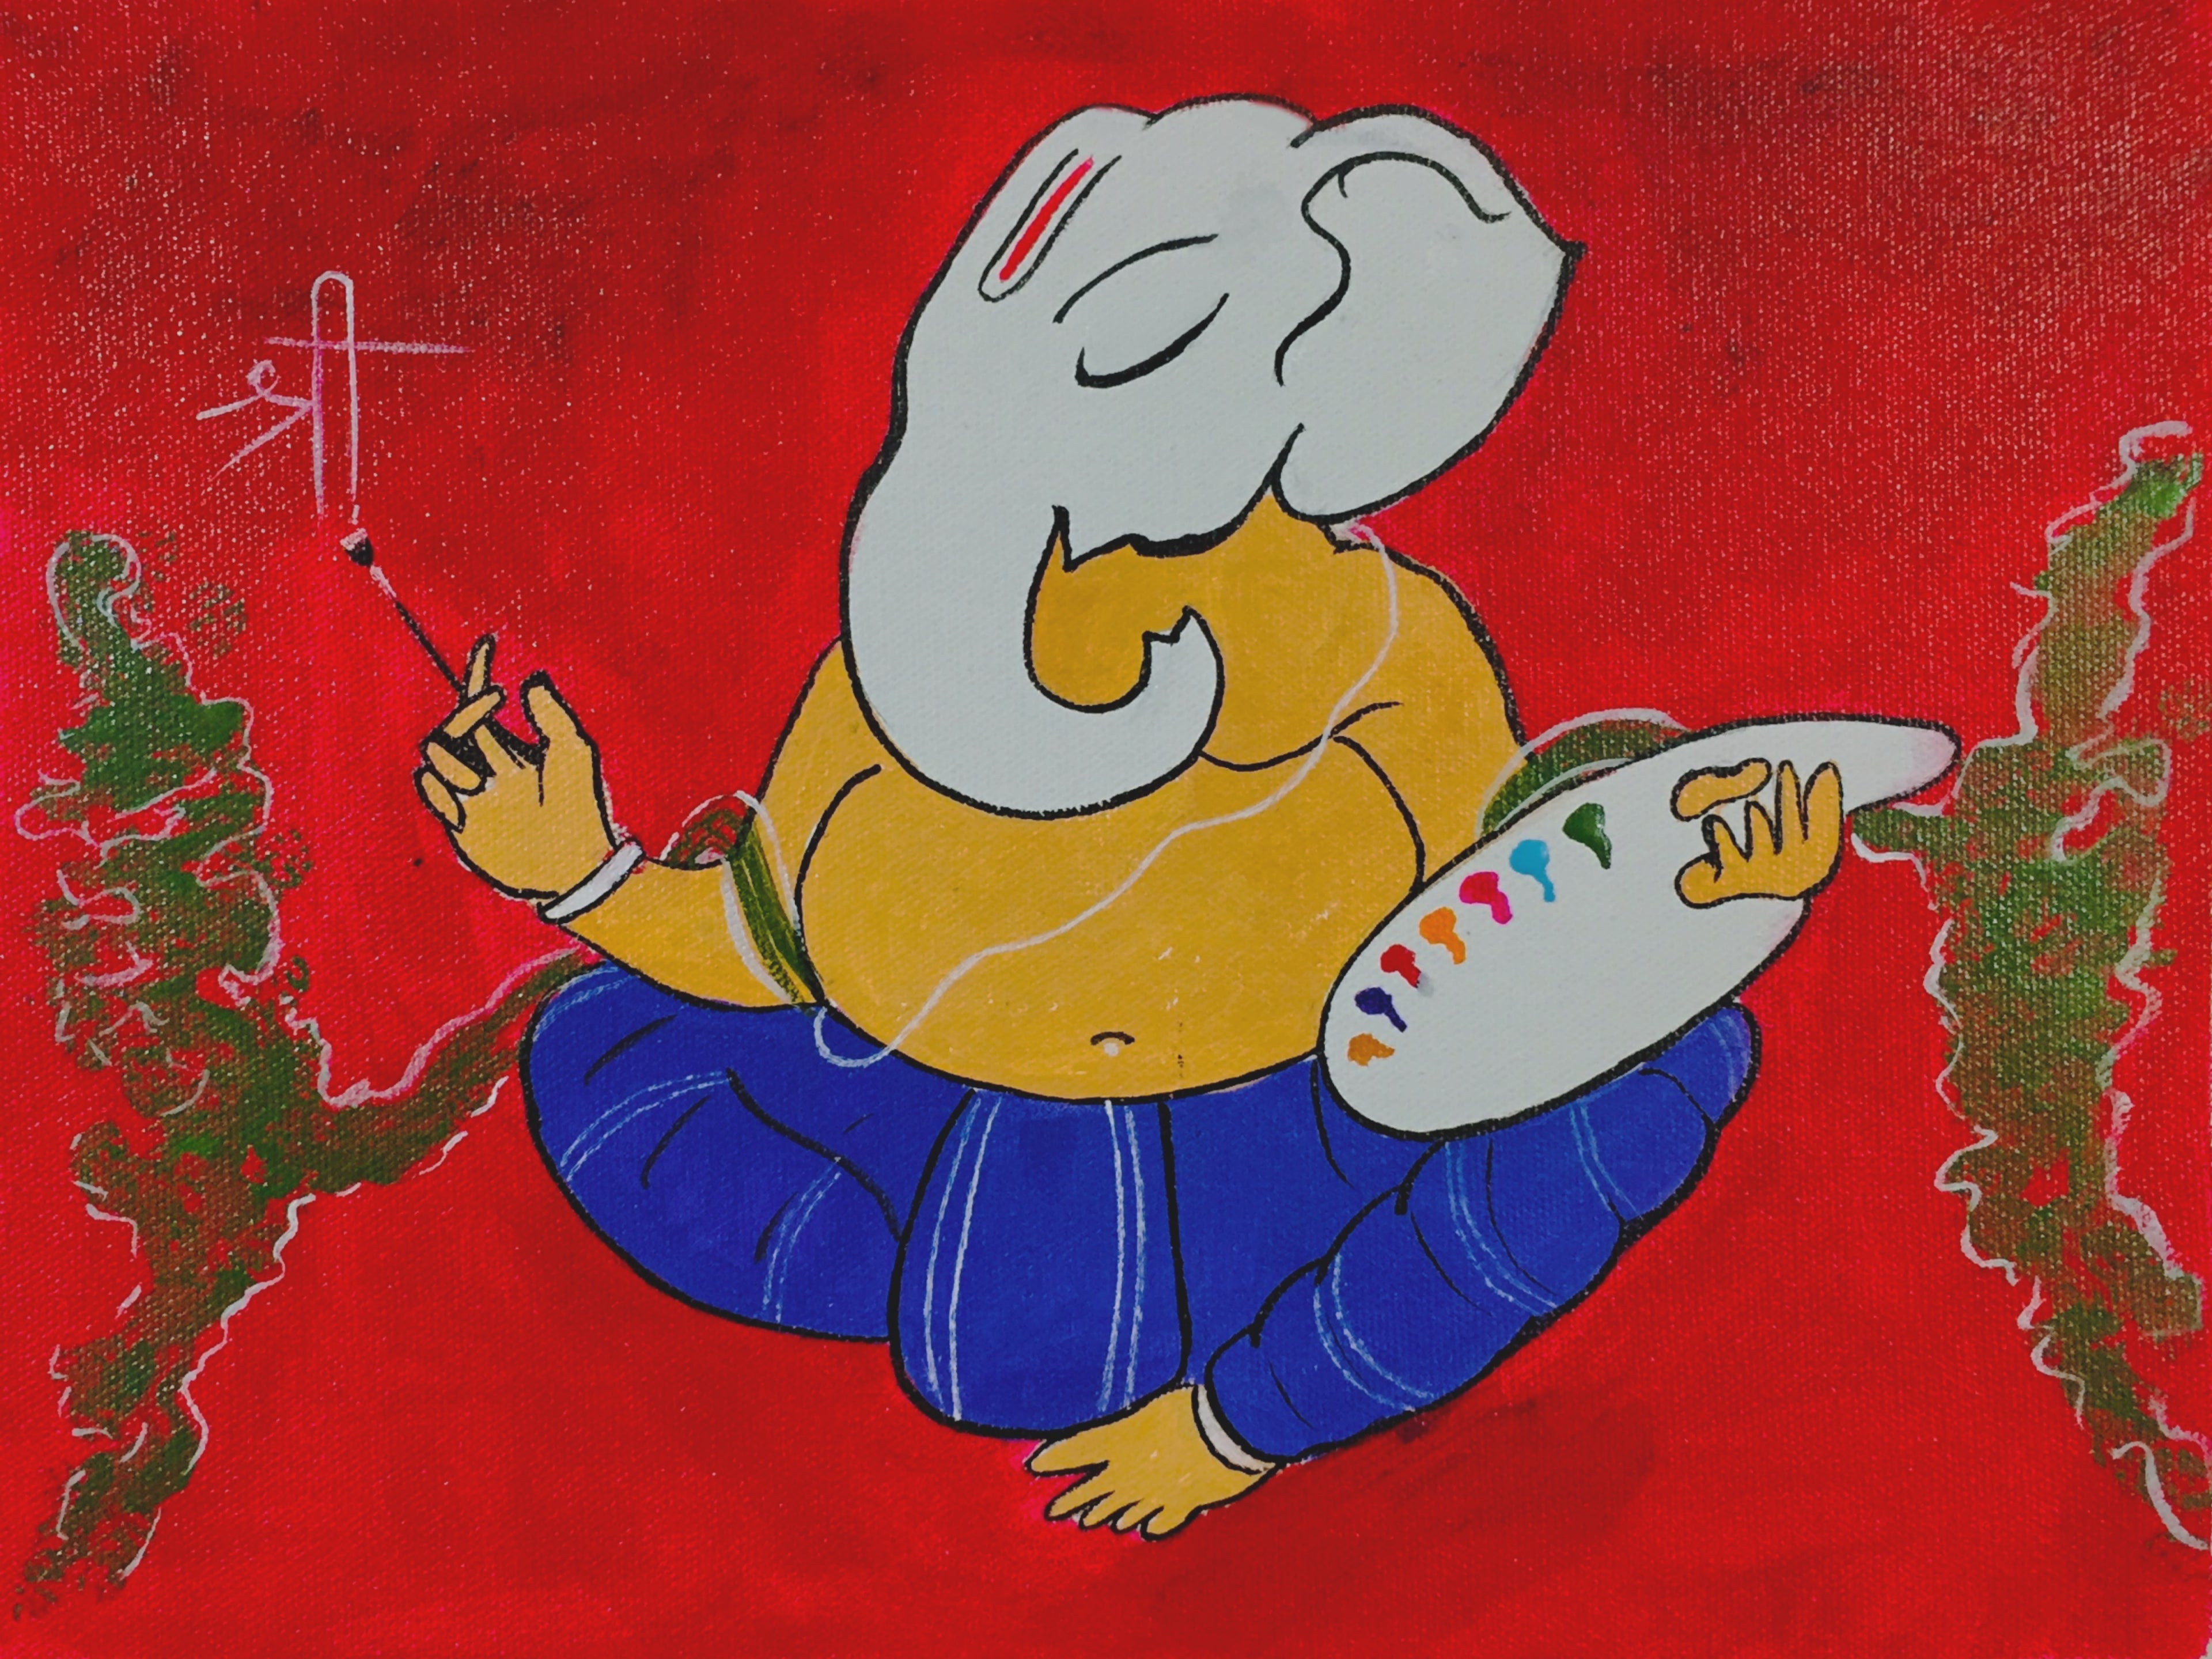 Shri Ganesh Ji Multicolour Photo Paper Print Poster Photographic Paper -  Religious posters in India - Buy art, film, design, movie, music, nature  and educational paintings/wallpapers at Flipkart.com